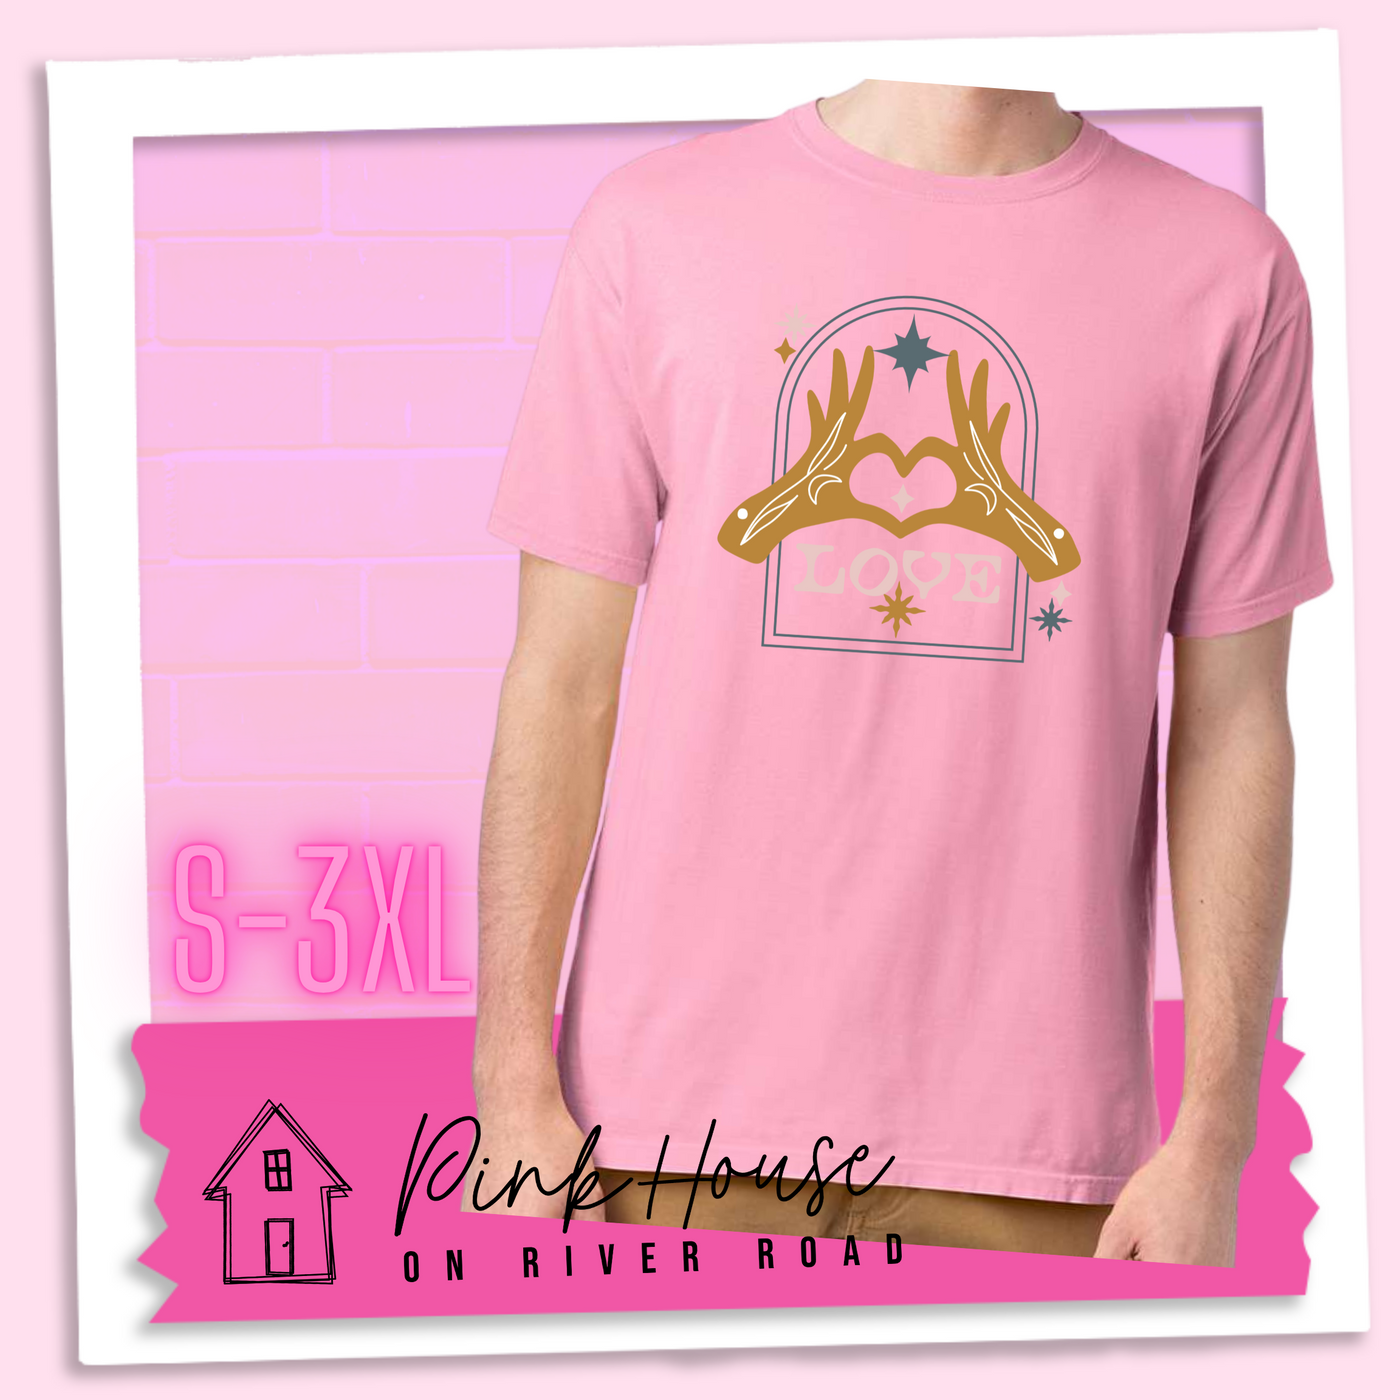 Cotton Candy tee with a graphic. Graphic is of two tattooed hands making a heart in front of an archway with stars and the word Love in the archway.